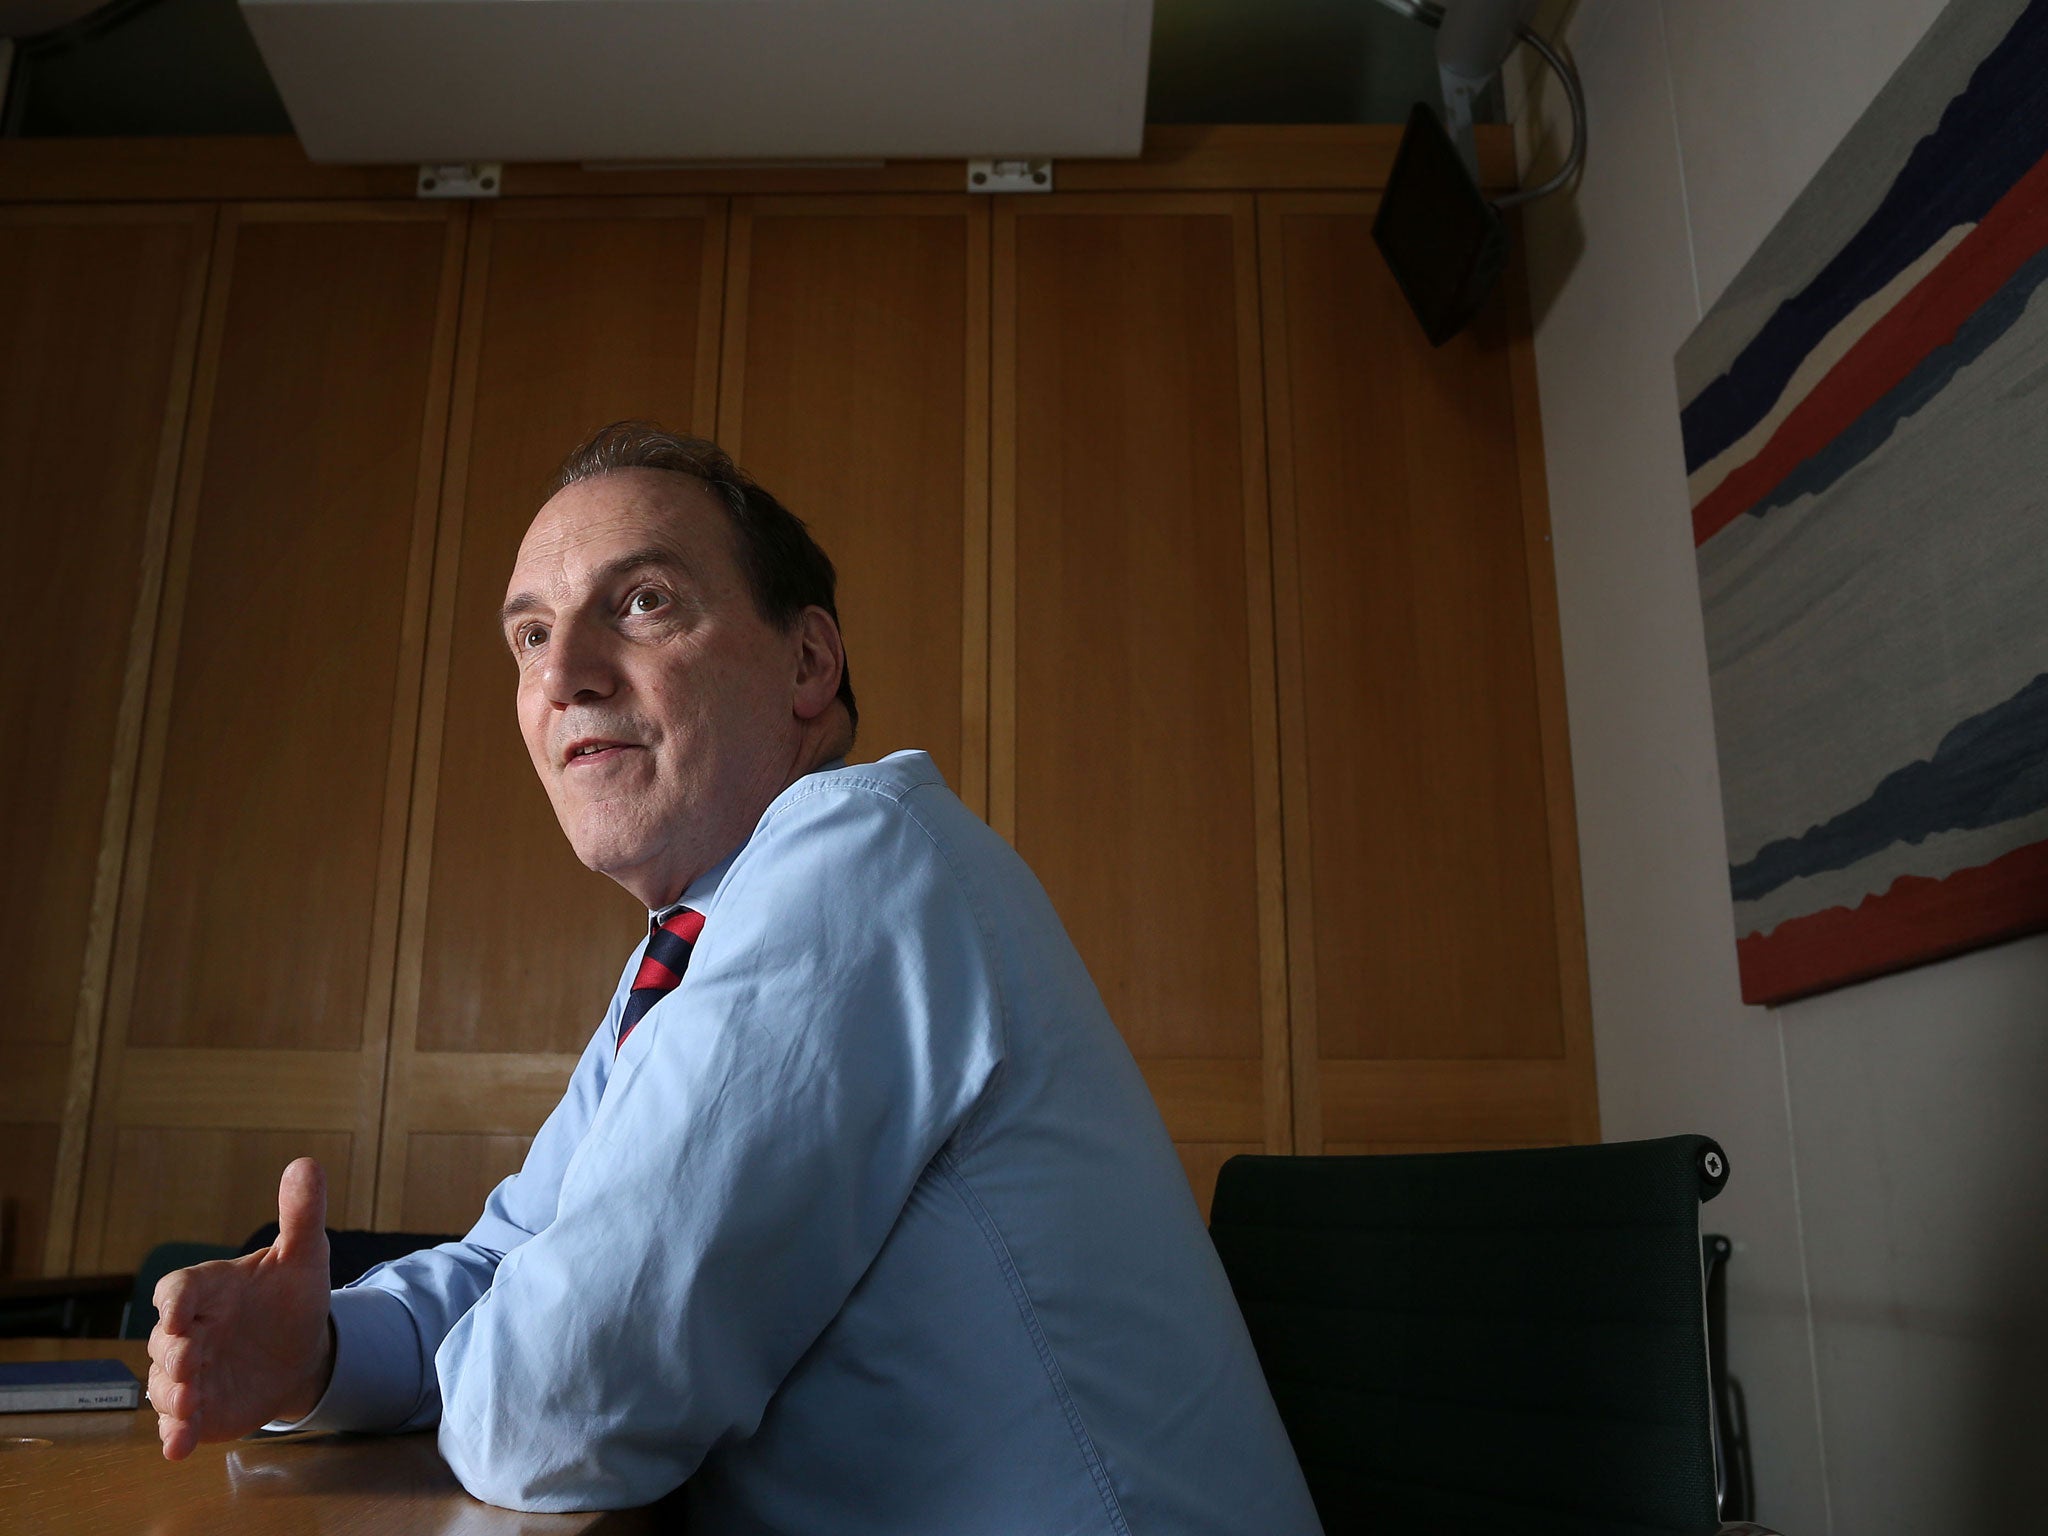 Simon Hughes has taken a ministerial role after 30 years at Westminster